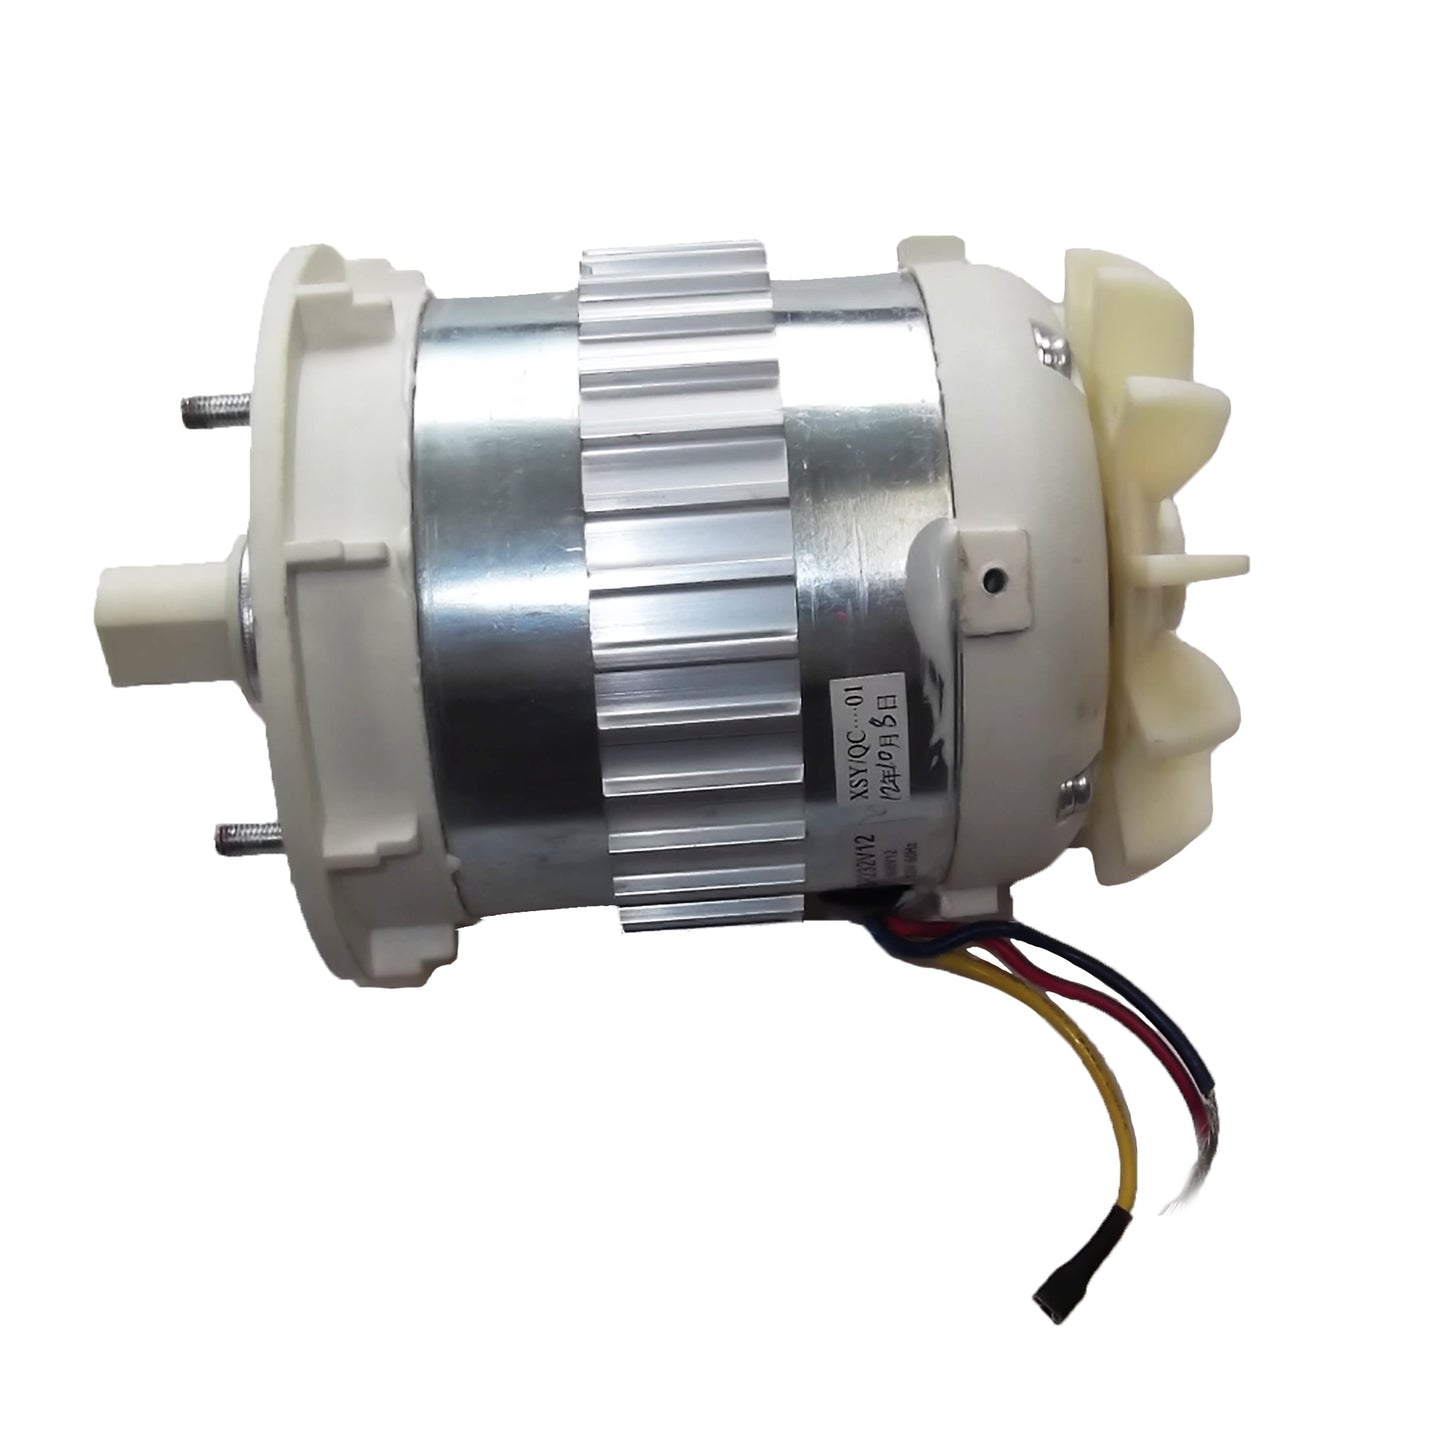 Motor for BR-252A Inflatable Blower